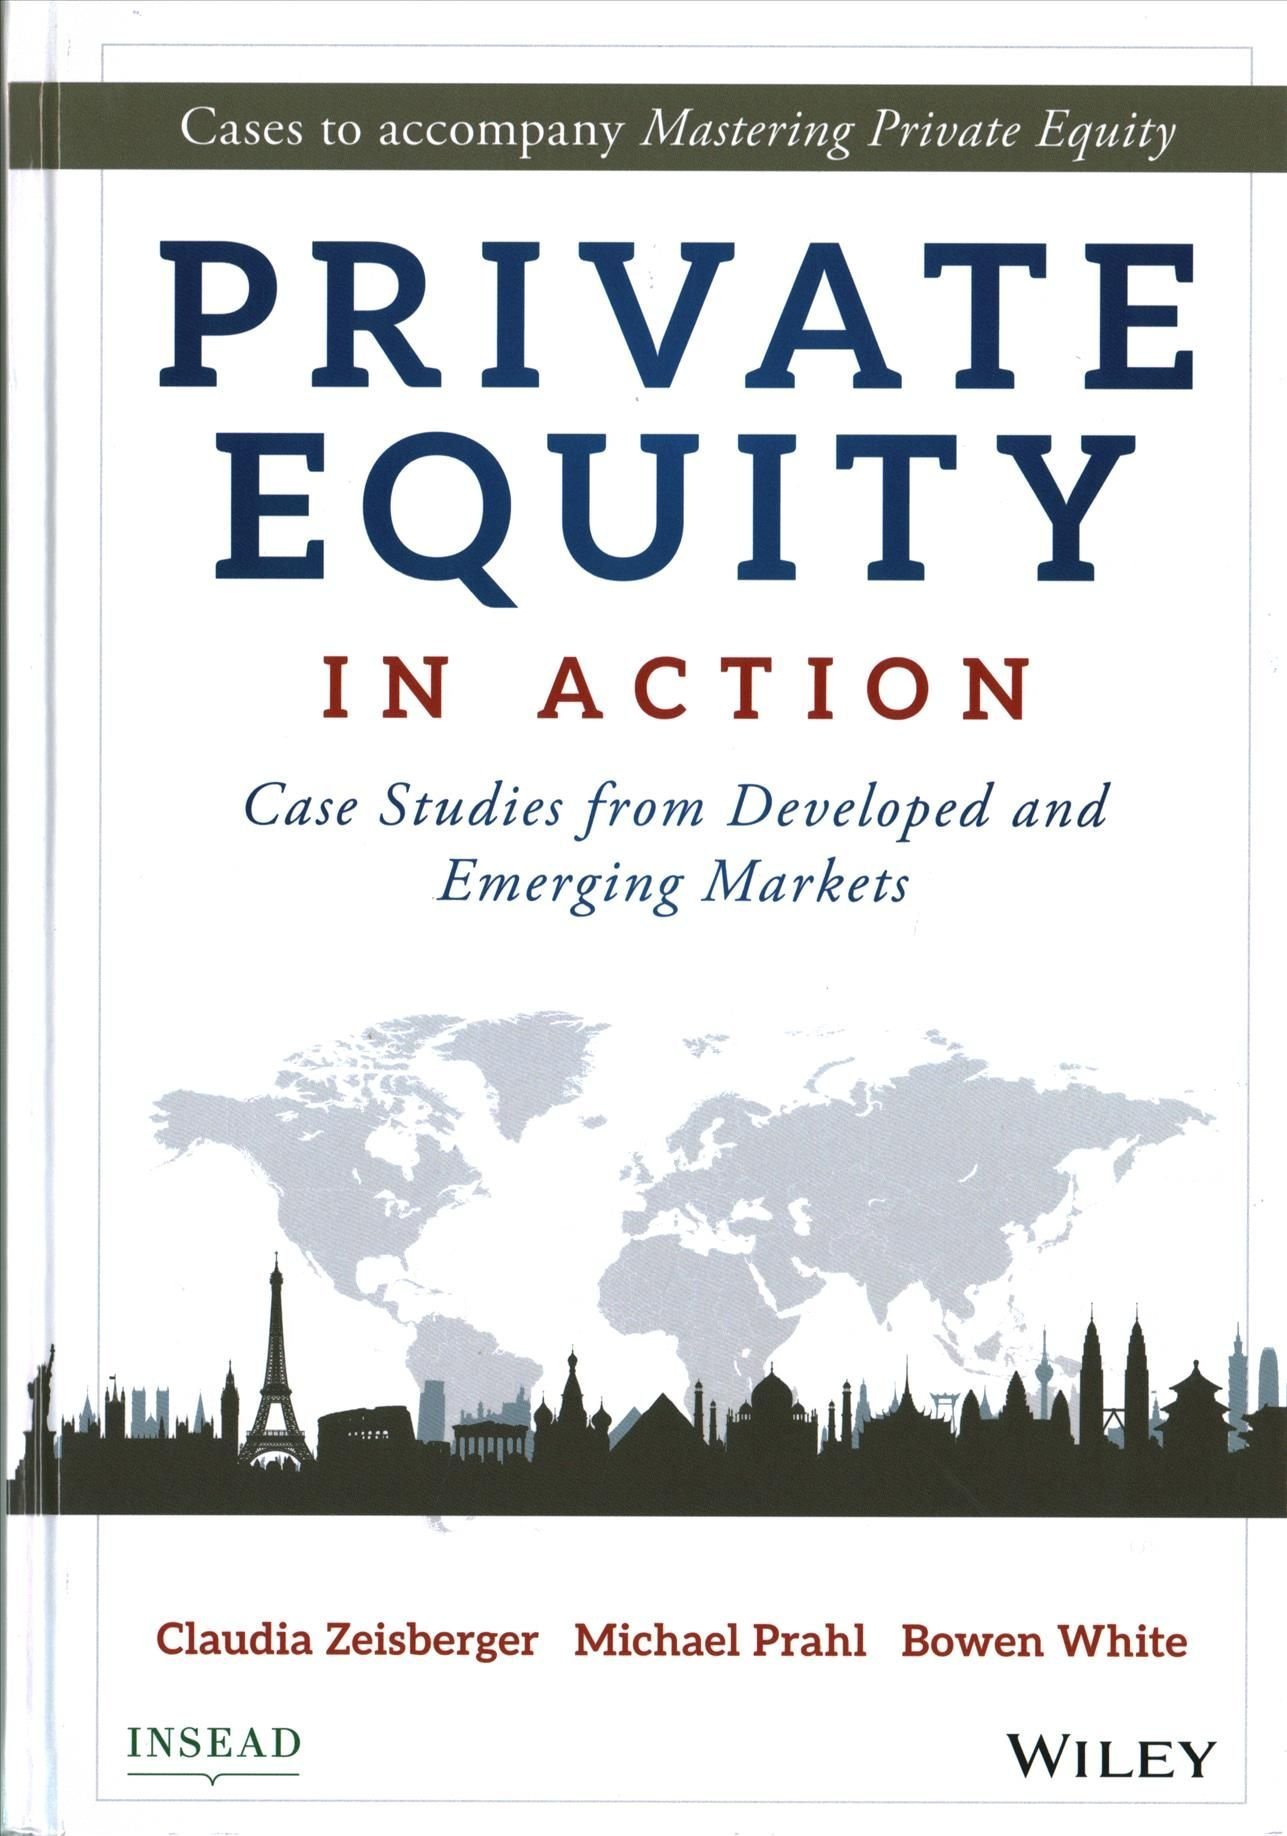 Private Equity in Action - Case Studies from Developed and Emerging Markets